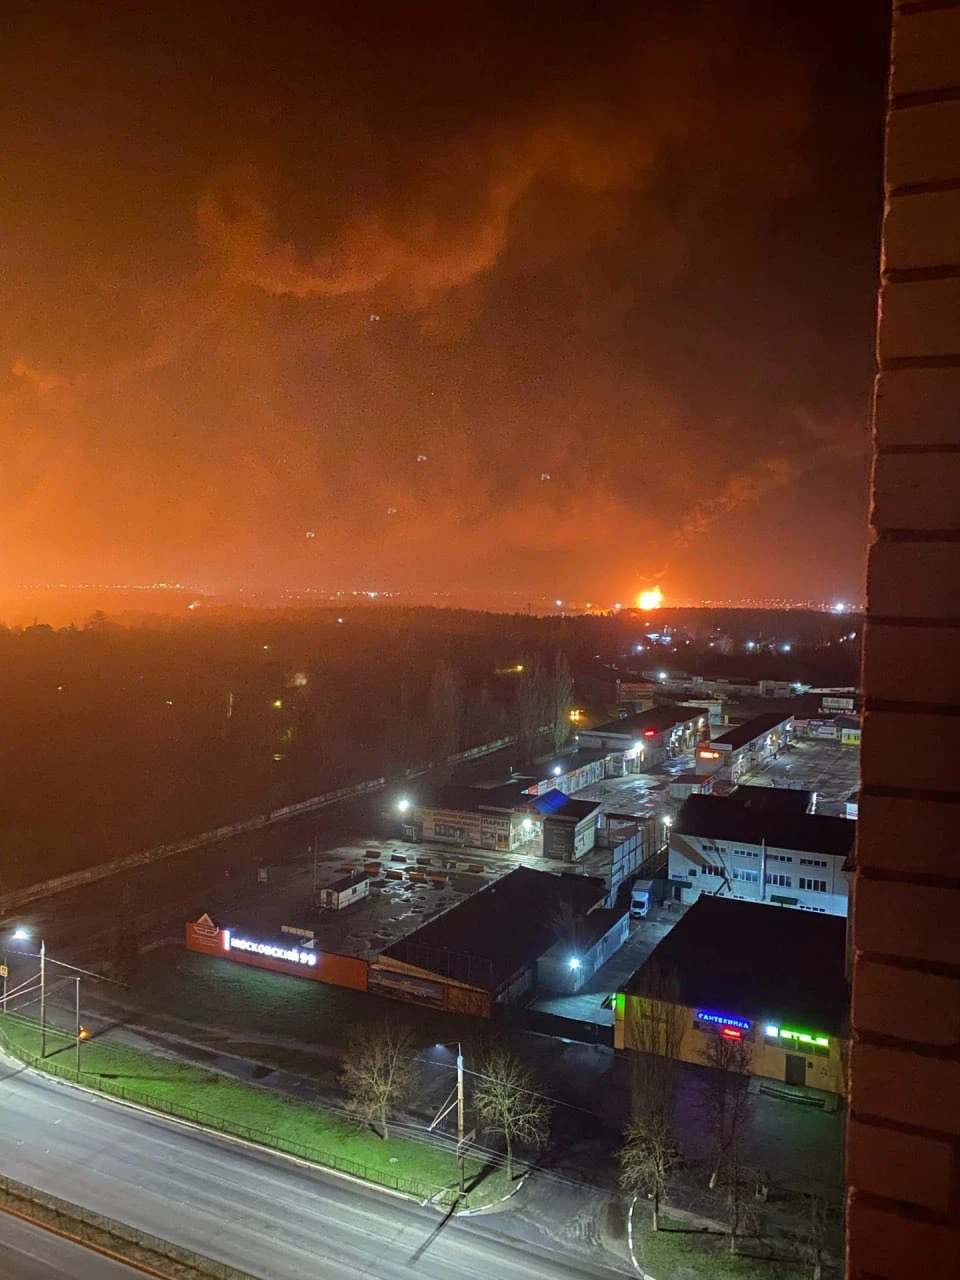 Fire Breaks Out at Two Oil Storage Facilities in Bryansk Where Russian Military is Based Nearby